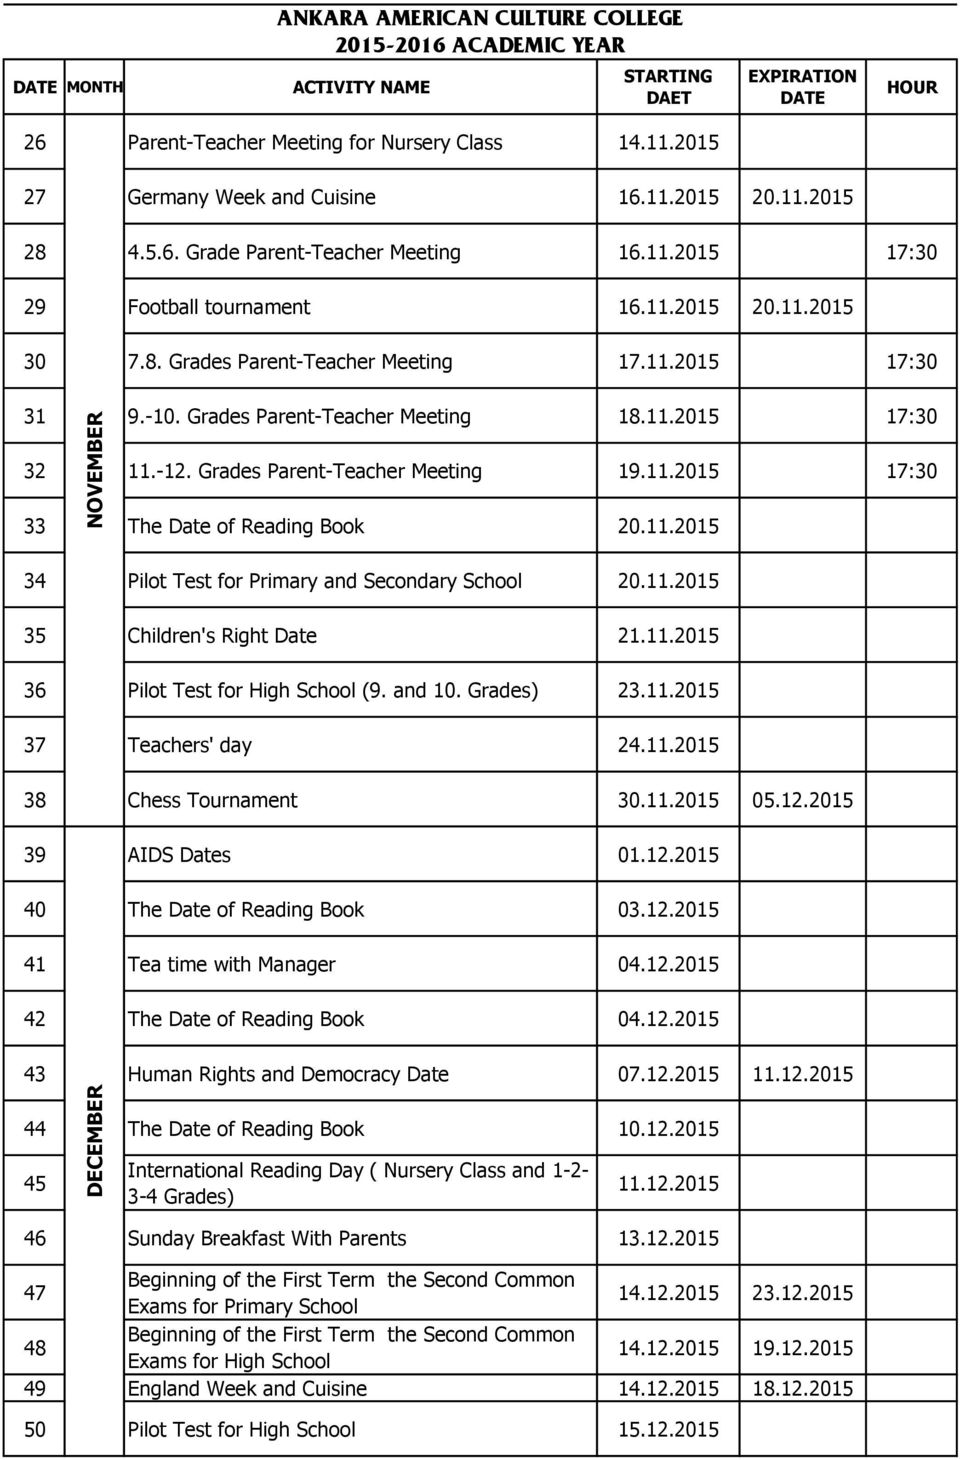 Grades Parent-Teacher Meeting 18.11.2015 17:30 32 11.-12. Grades Parent-Teacher Meeting 19.11.2015 17:30 33 The Date of Reading Book 20.11.2015 34 Pilot Test for Primary and Secondary School 20.11.2015 35 Children's Right Date 21.